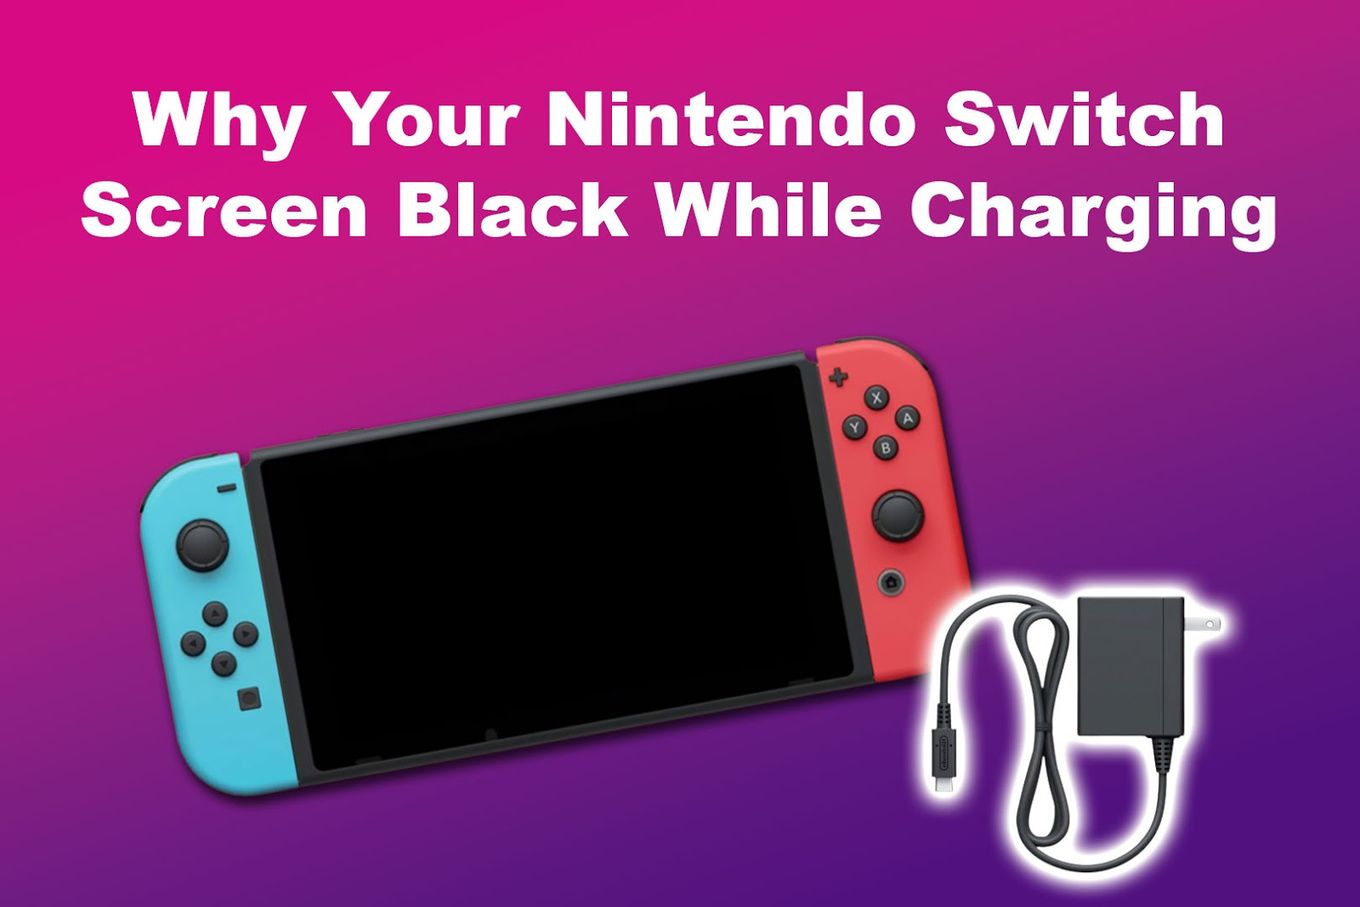 Why Your Nintendo Switch Screen Black While Charging